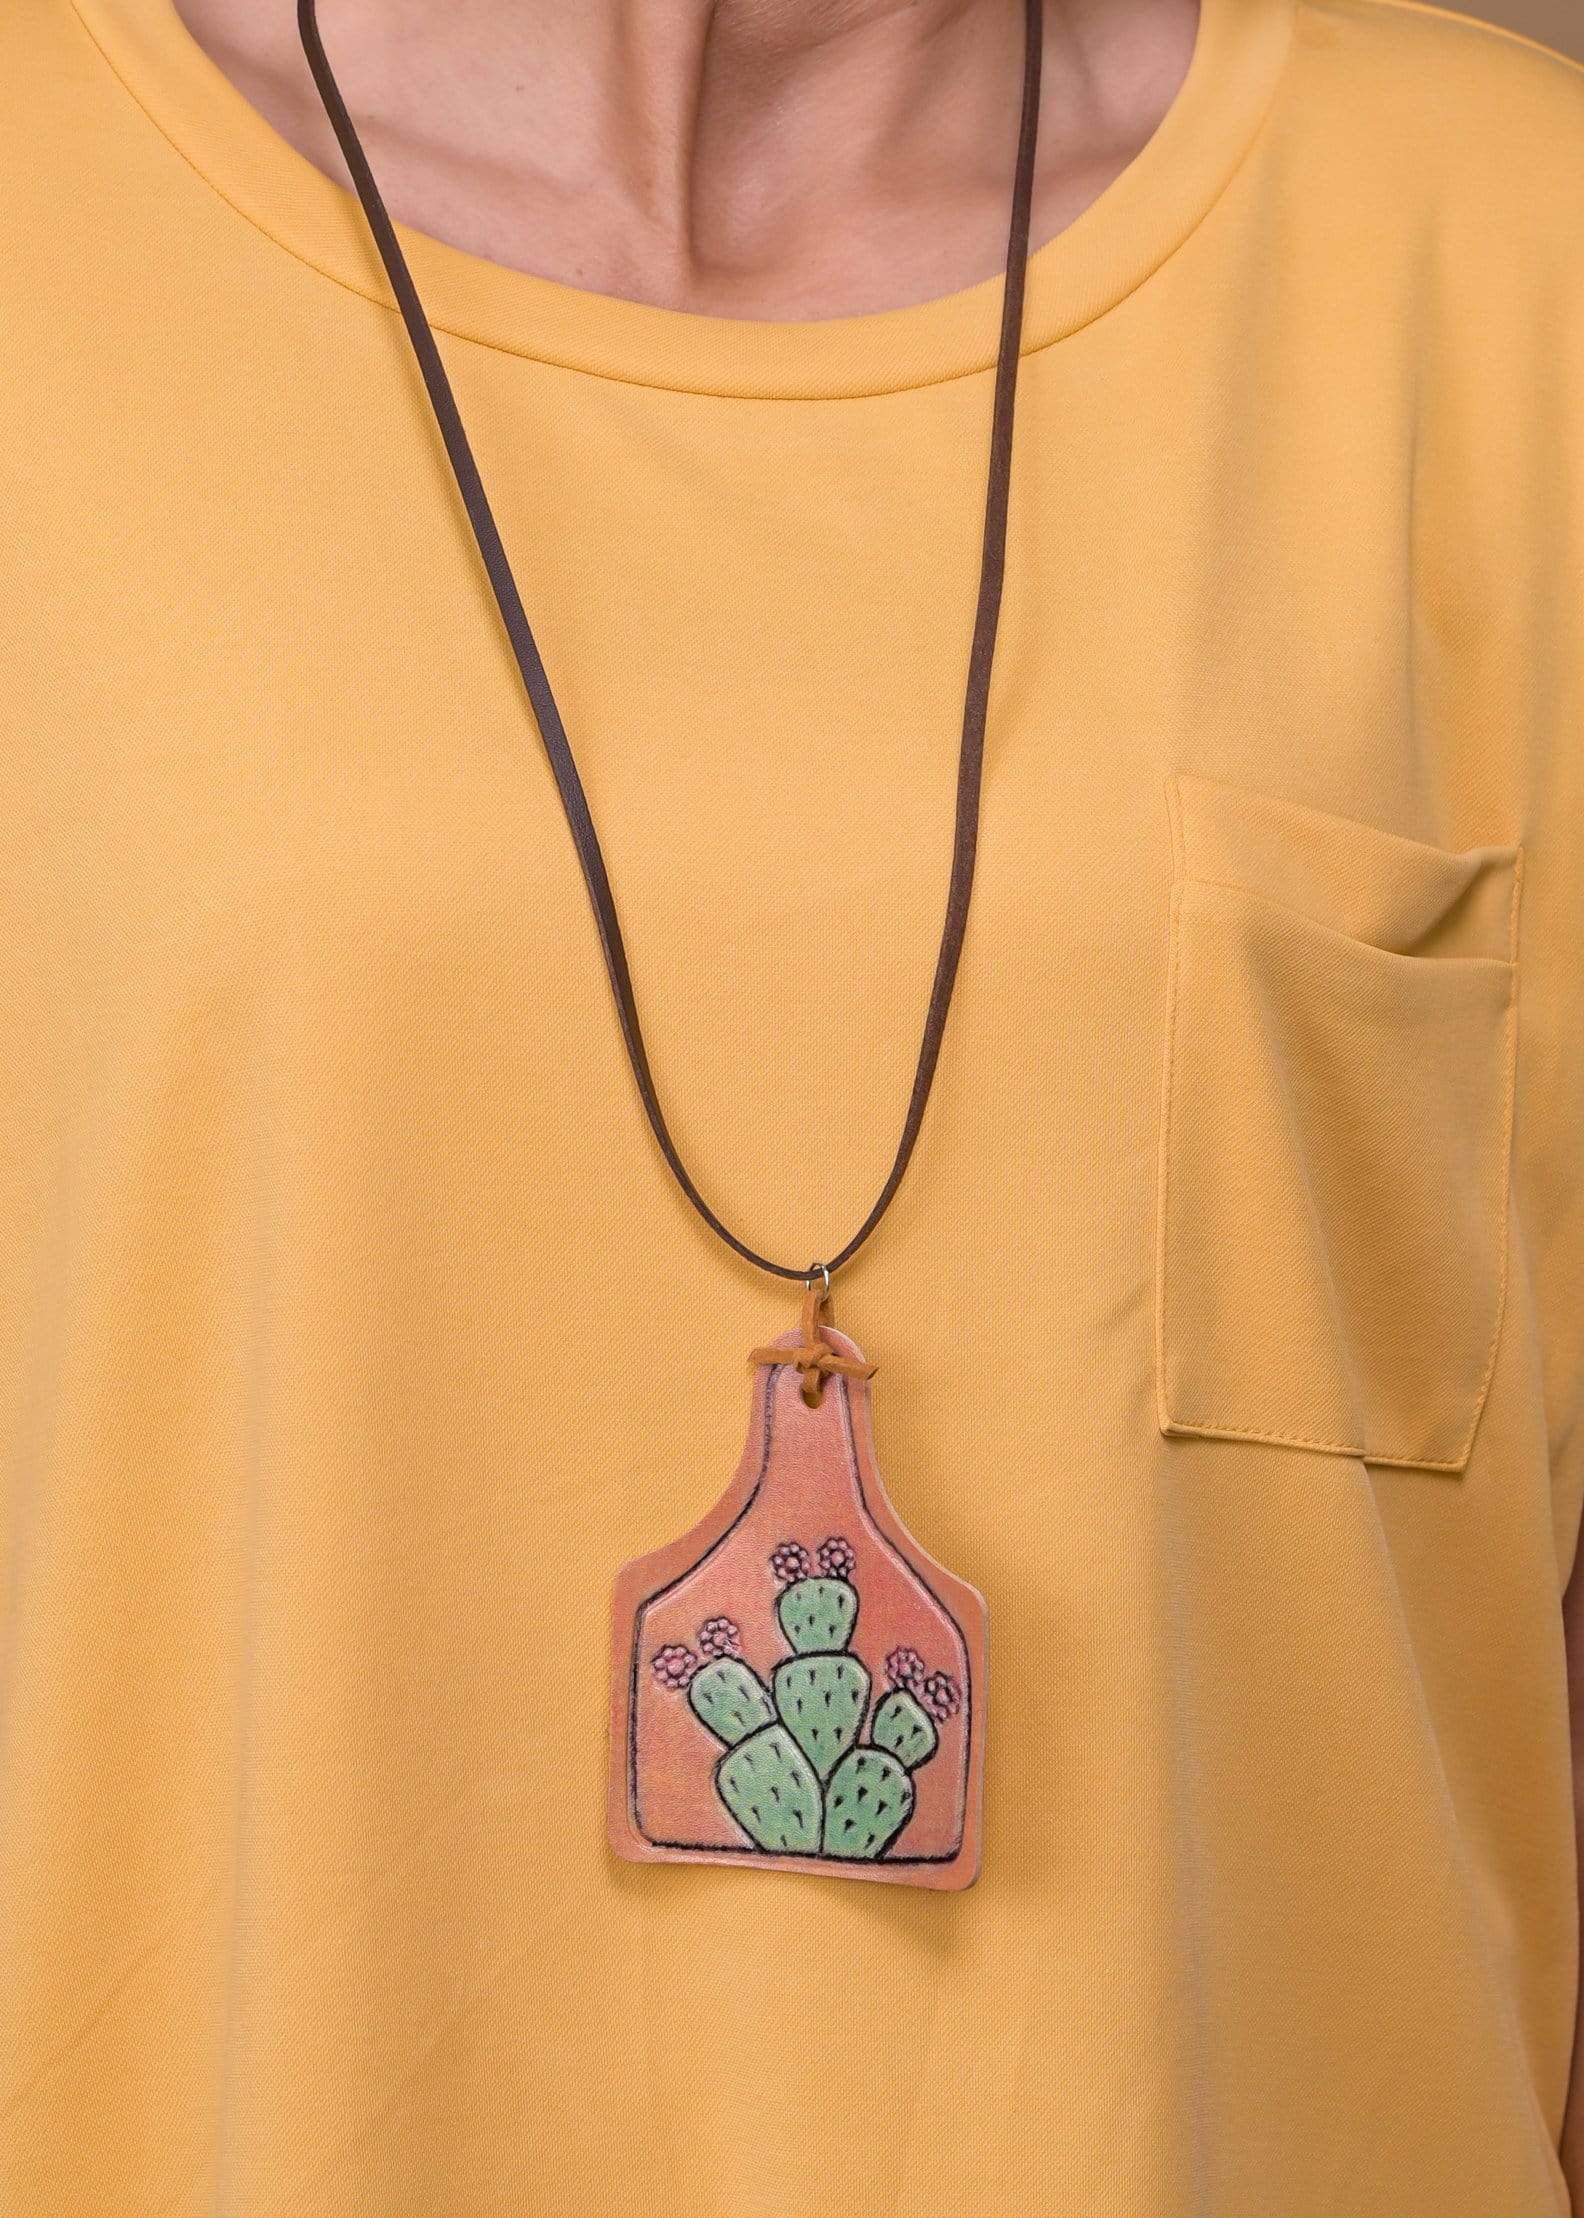 Leather Cow Ear Tag Necklace - Cactus